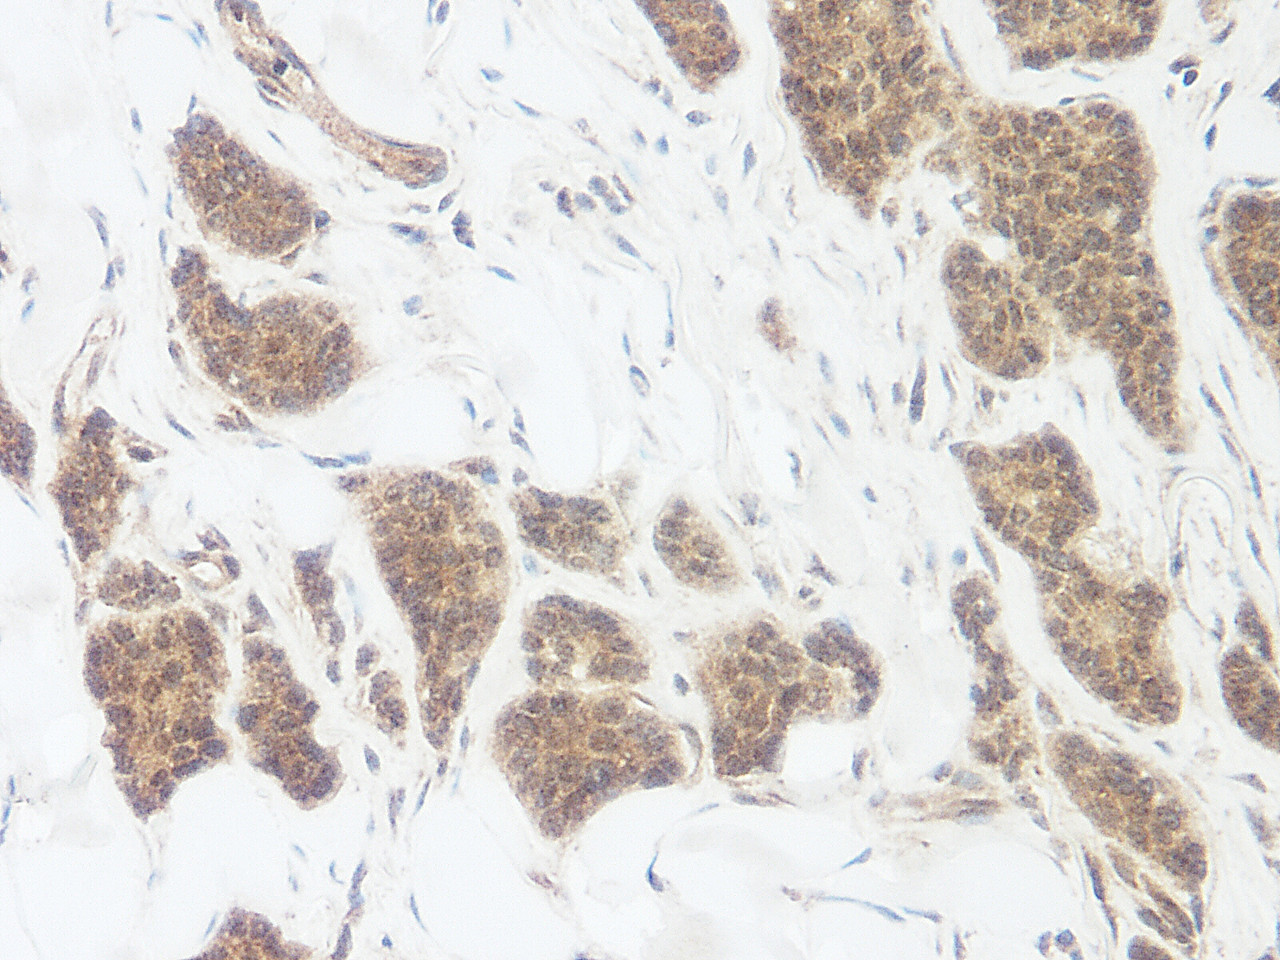 This antibody stained formalin-fixed, paraffin-embedded sections of human breast invasive ductal carcinoma. The recommended concentration is 0.125 ug/ml - 0.25 ug/ml with an overnight incubation at 4&#730;C. An HRP-labeled polymer detection system was used with a DAB chromogen. Heat induced antigen retrieval with a pH 6.0 sodium citrate buffer is recommended. Optimal concentrations and conditions may vary.